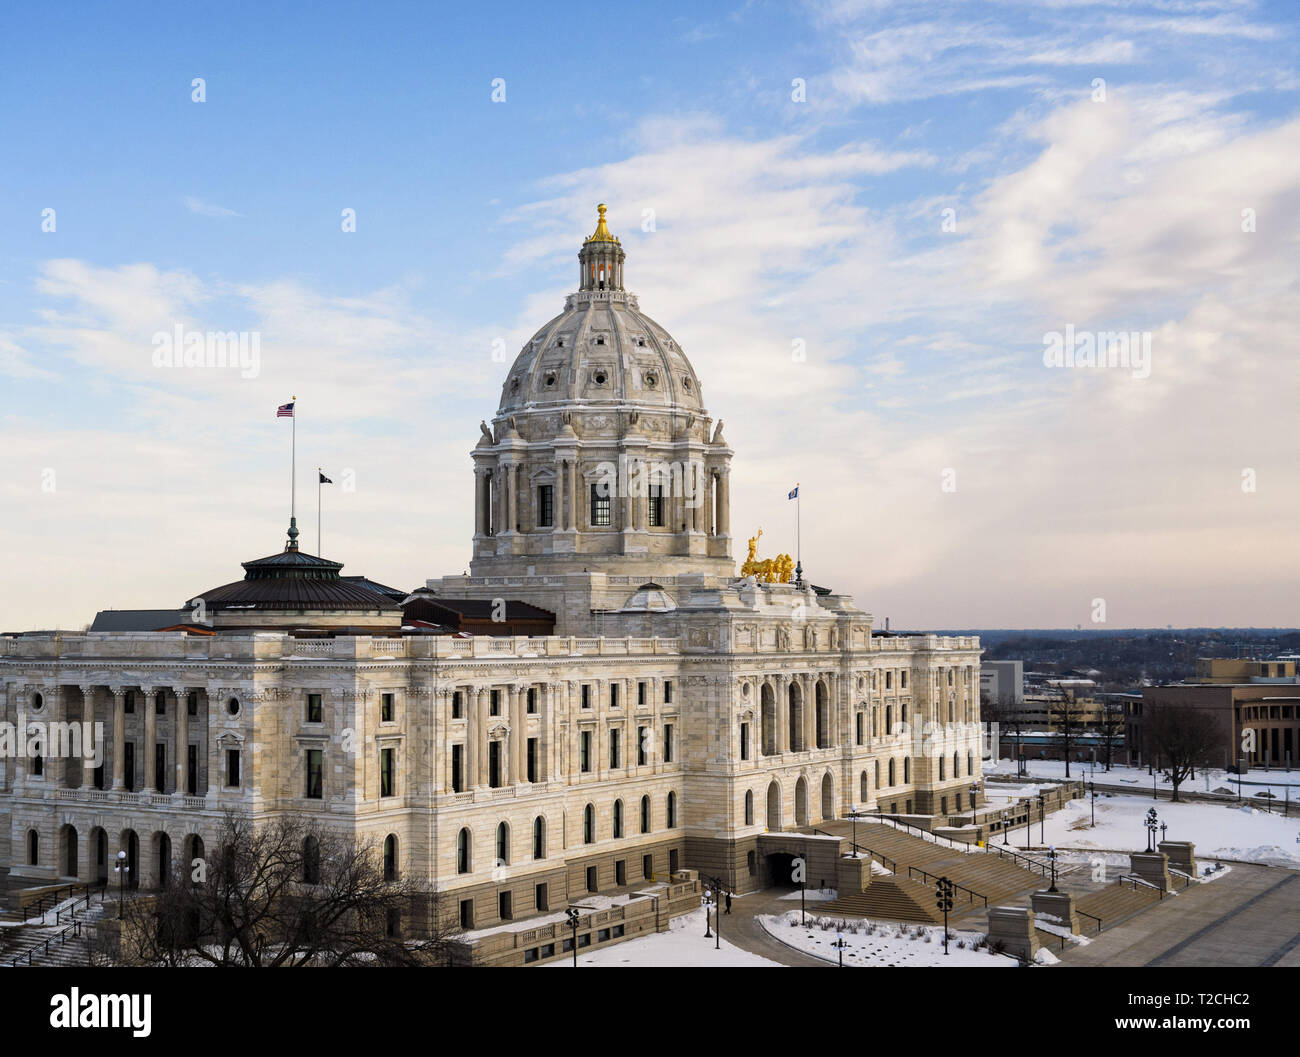 St. Paul, MN, USA. 13th Feb, 2018. Minnesota, USA - The Minnesota State Capitol. ] GLEN STUBBE Â¥ glen.stubbe@startribune.com Tuesday, February 13, 2018 The 2018 legislative session will both shape and be shaped by the forthcoming campaign, and a number of candidates for numerous political offices will be in the statehouse mix.EDS, thes eare for pre session preview story on Feb 18 and any appropriate use after that. Credit: Glen Stubbe/Minneapolis Star Tribune/ZUMA Wire/Alamy Live News Stock Photo